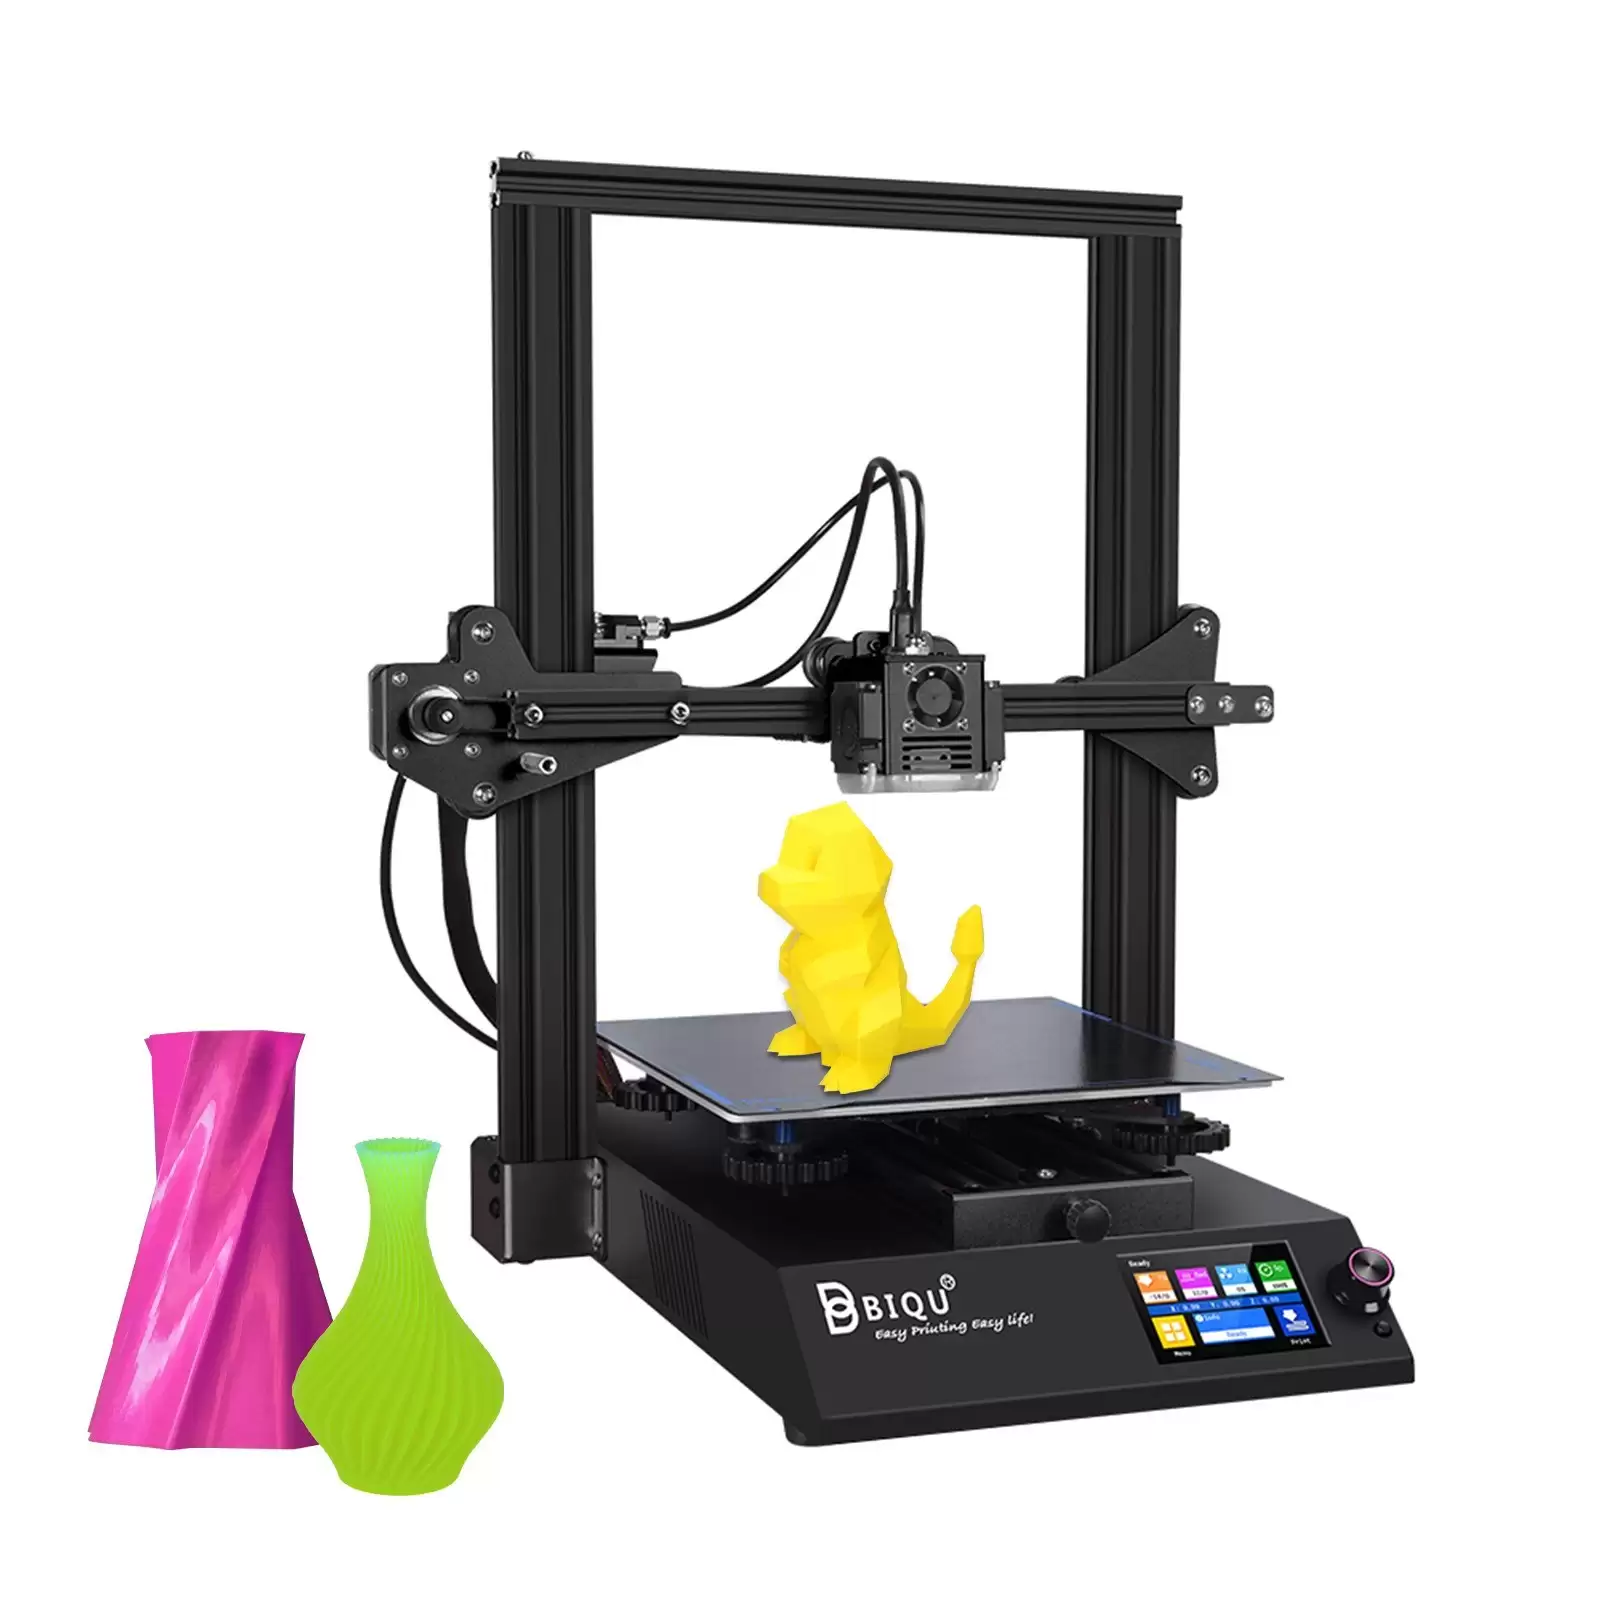 Order In Just $319.99 32% Off Biqu B1 Fdm 3d Printer Dual Operation System, Free Shipping At Tomtop